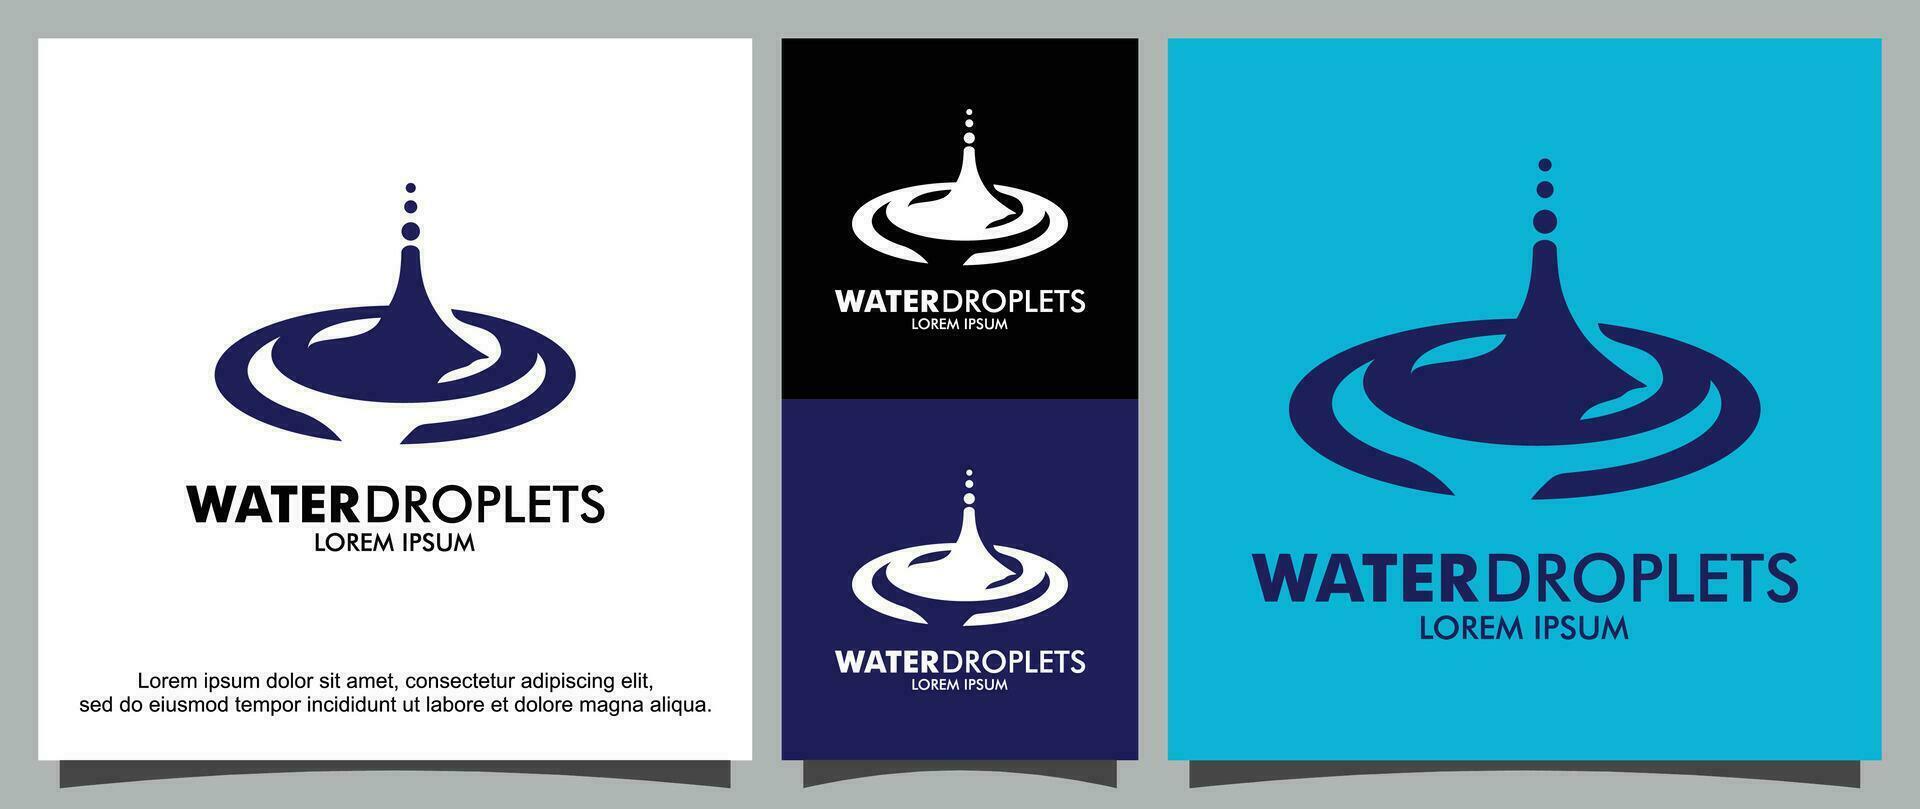 Water droplets logo template vector